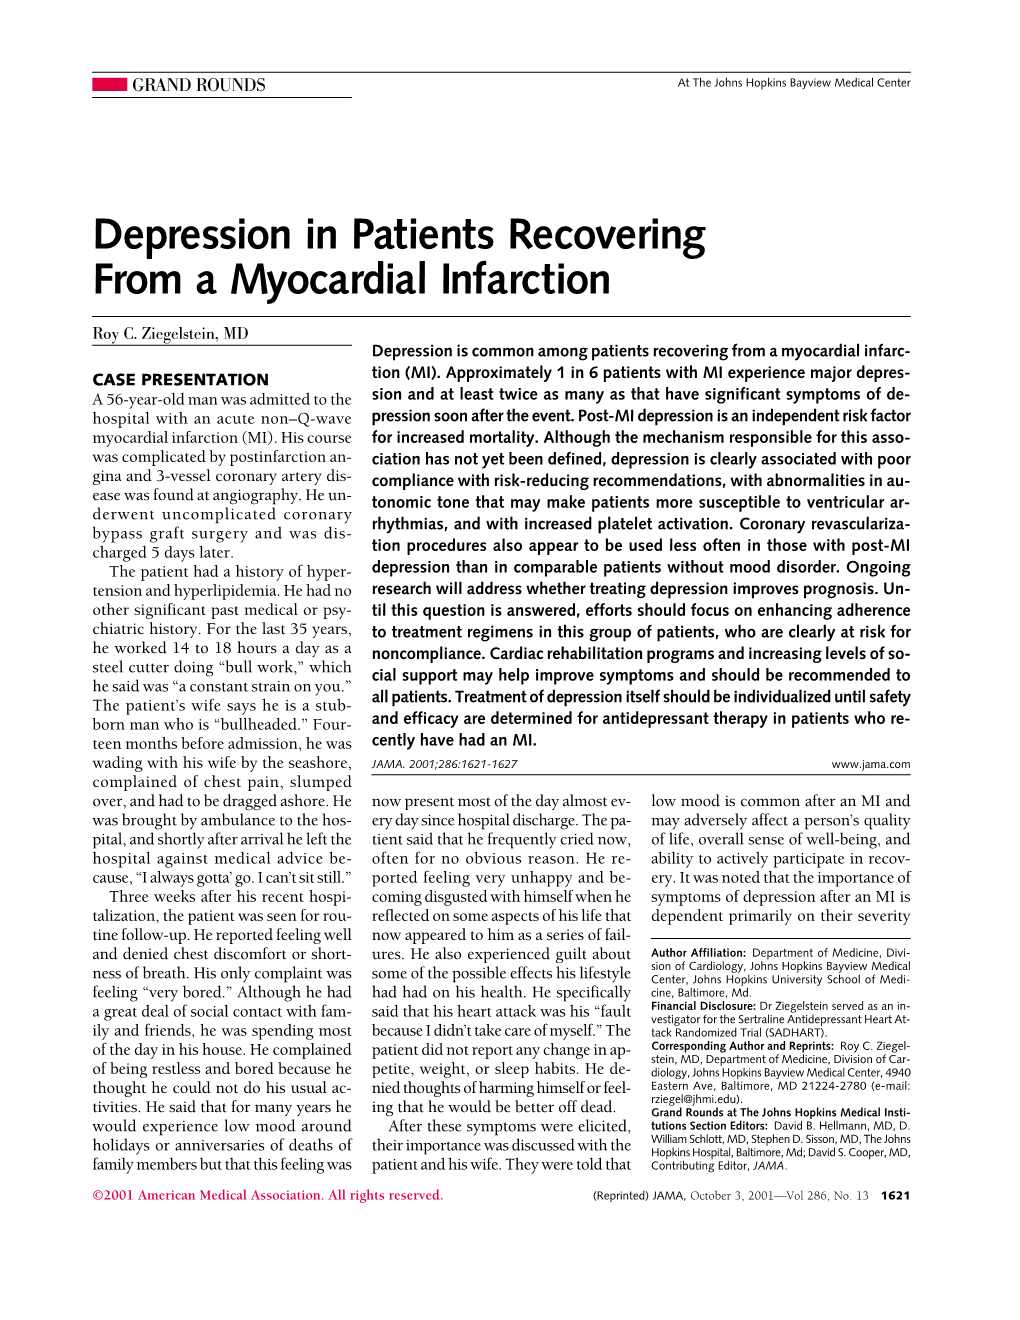 Depression in Patients Recovering from a Myocardial Infarction